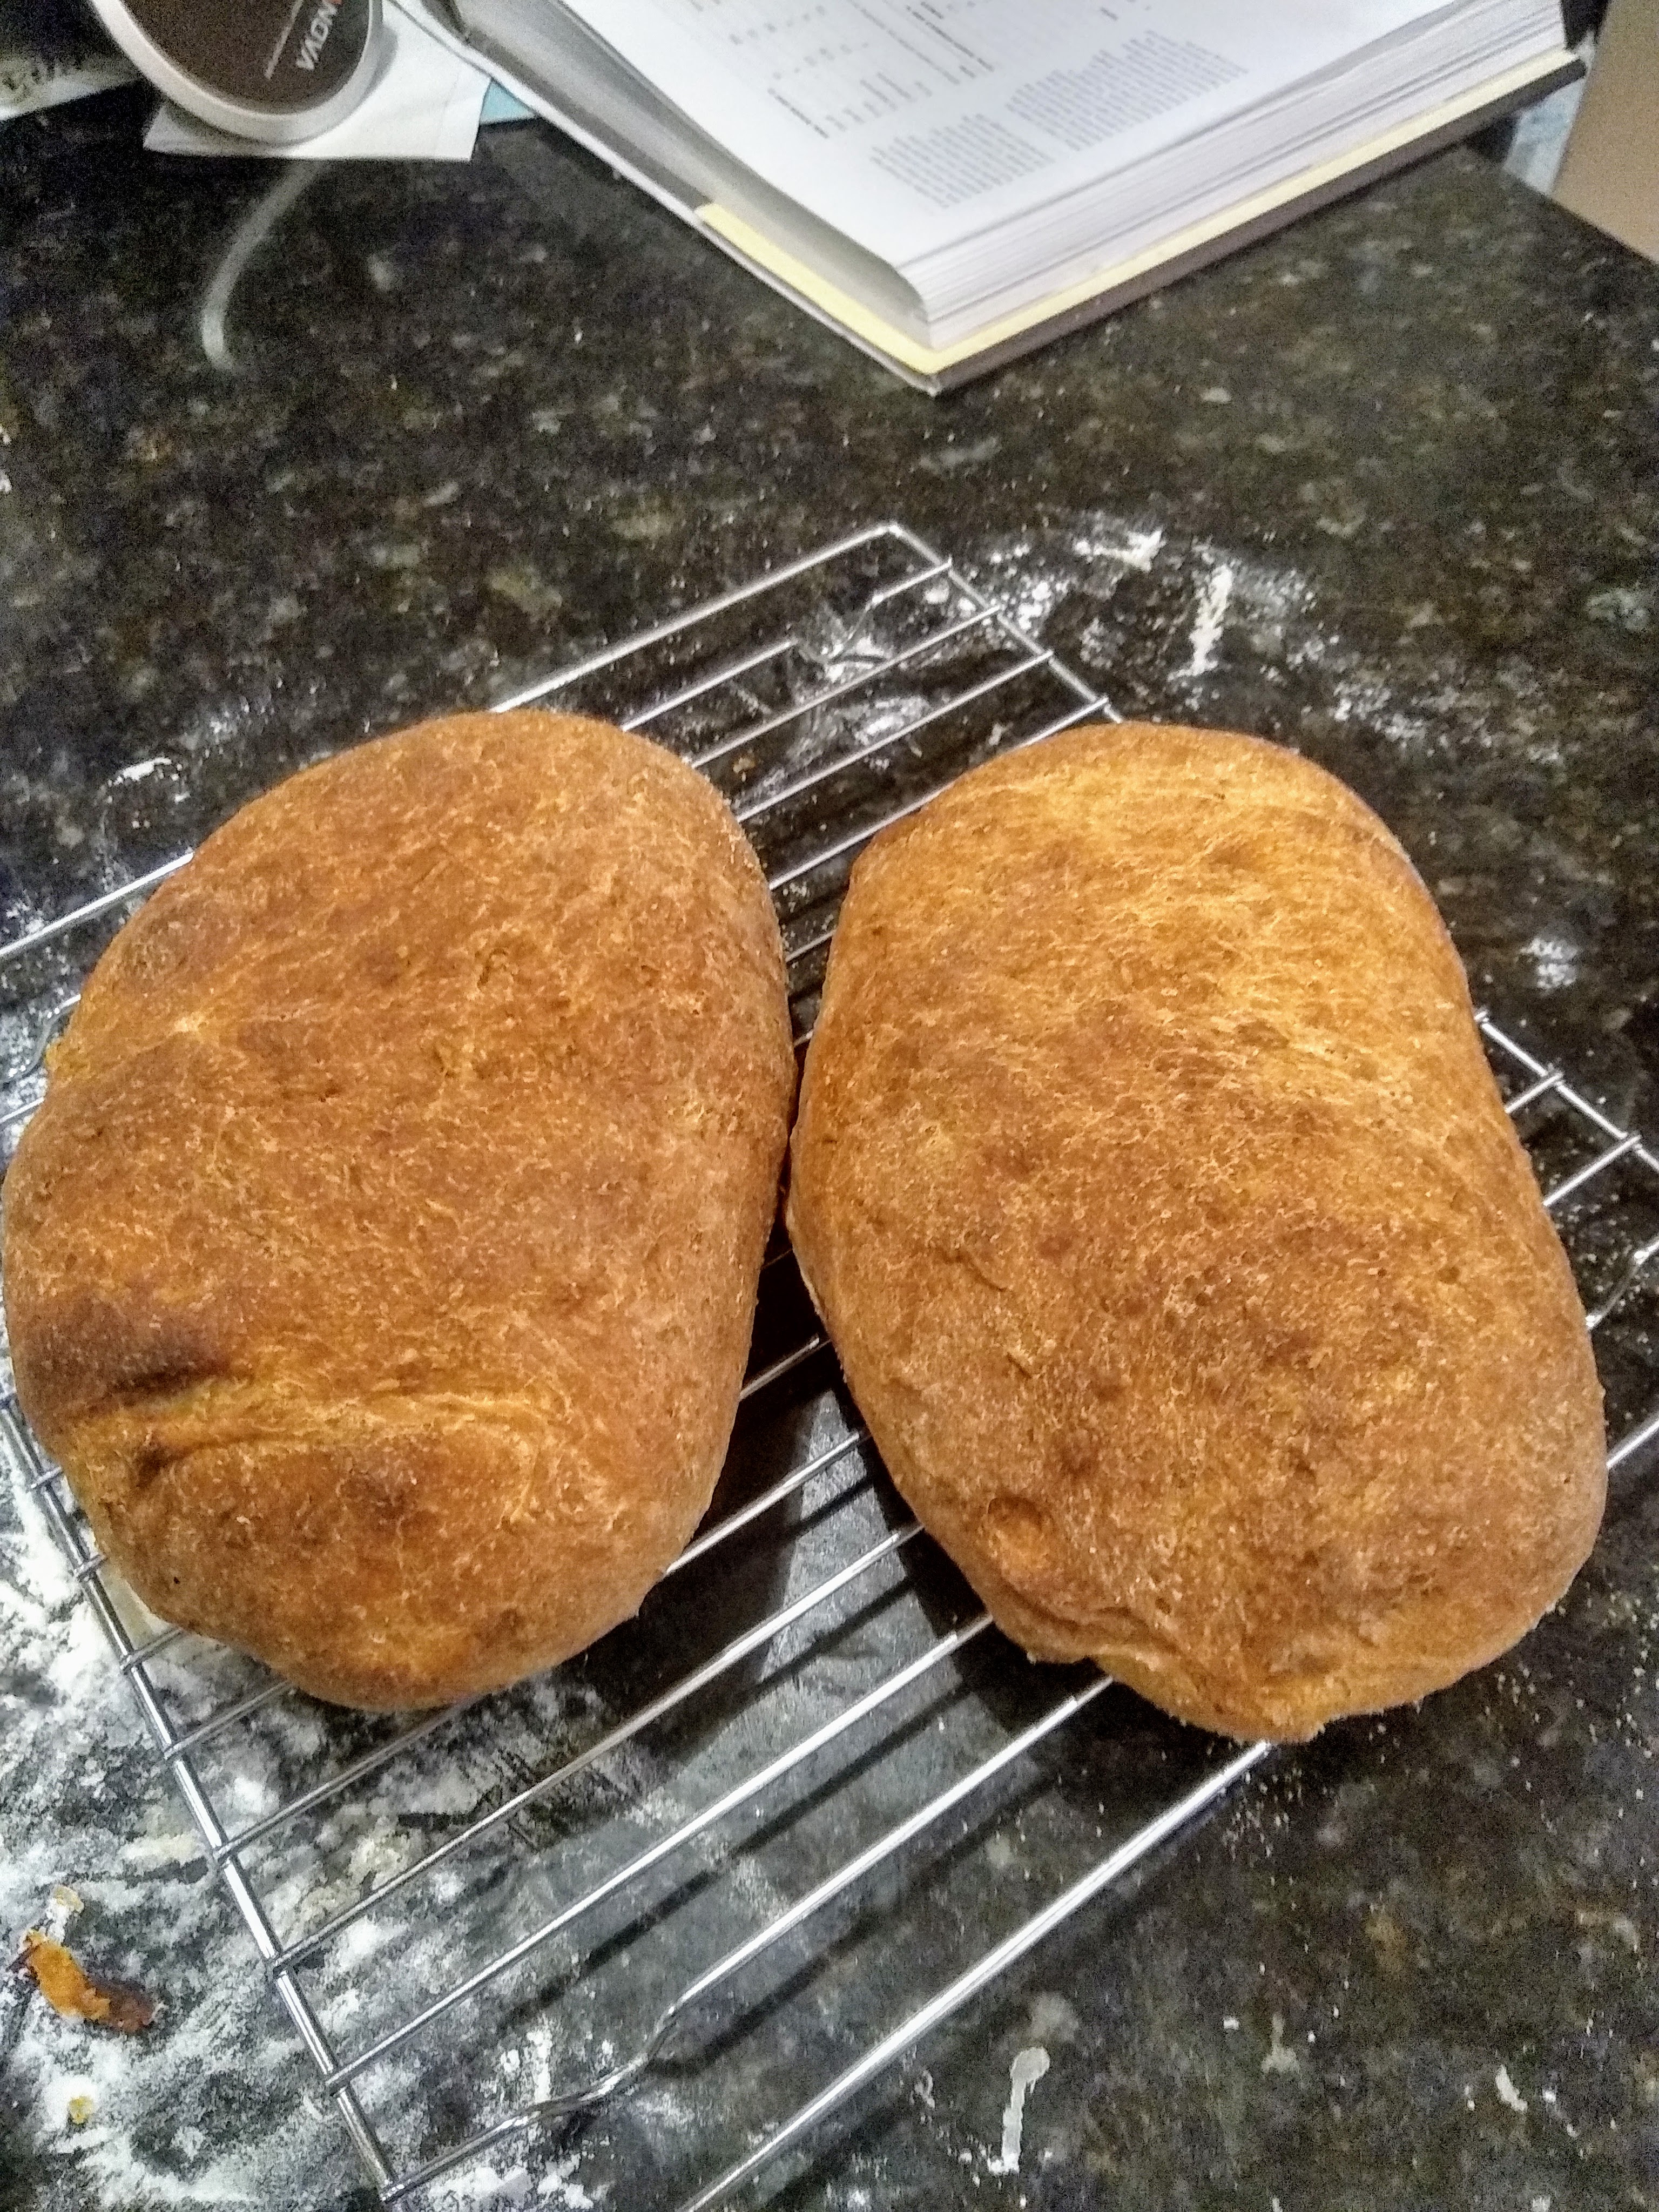 Finished rye sourdough loaves.